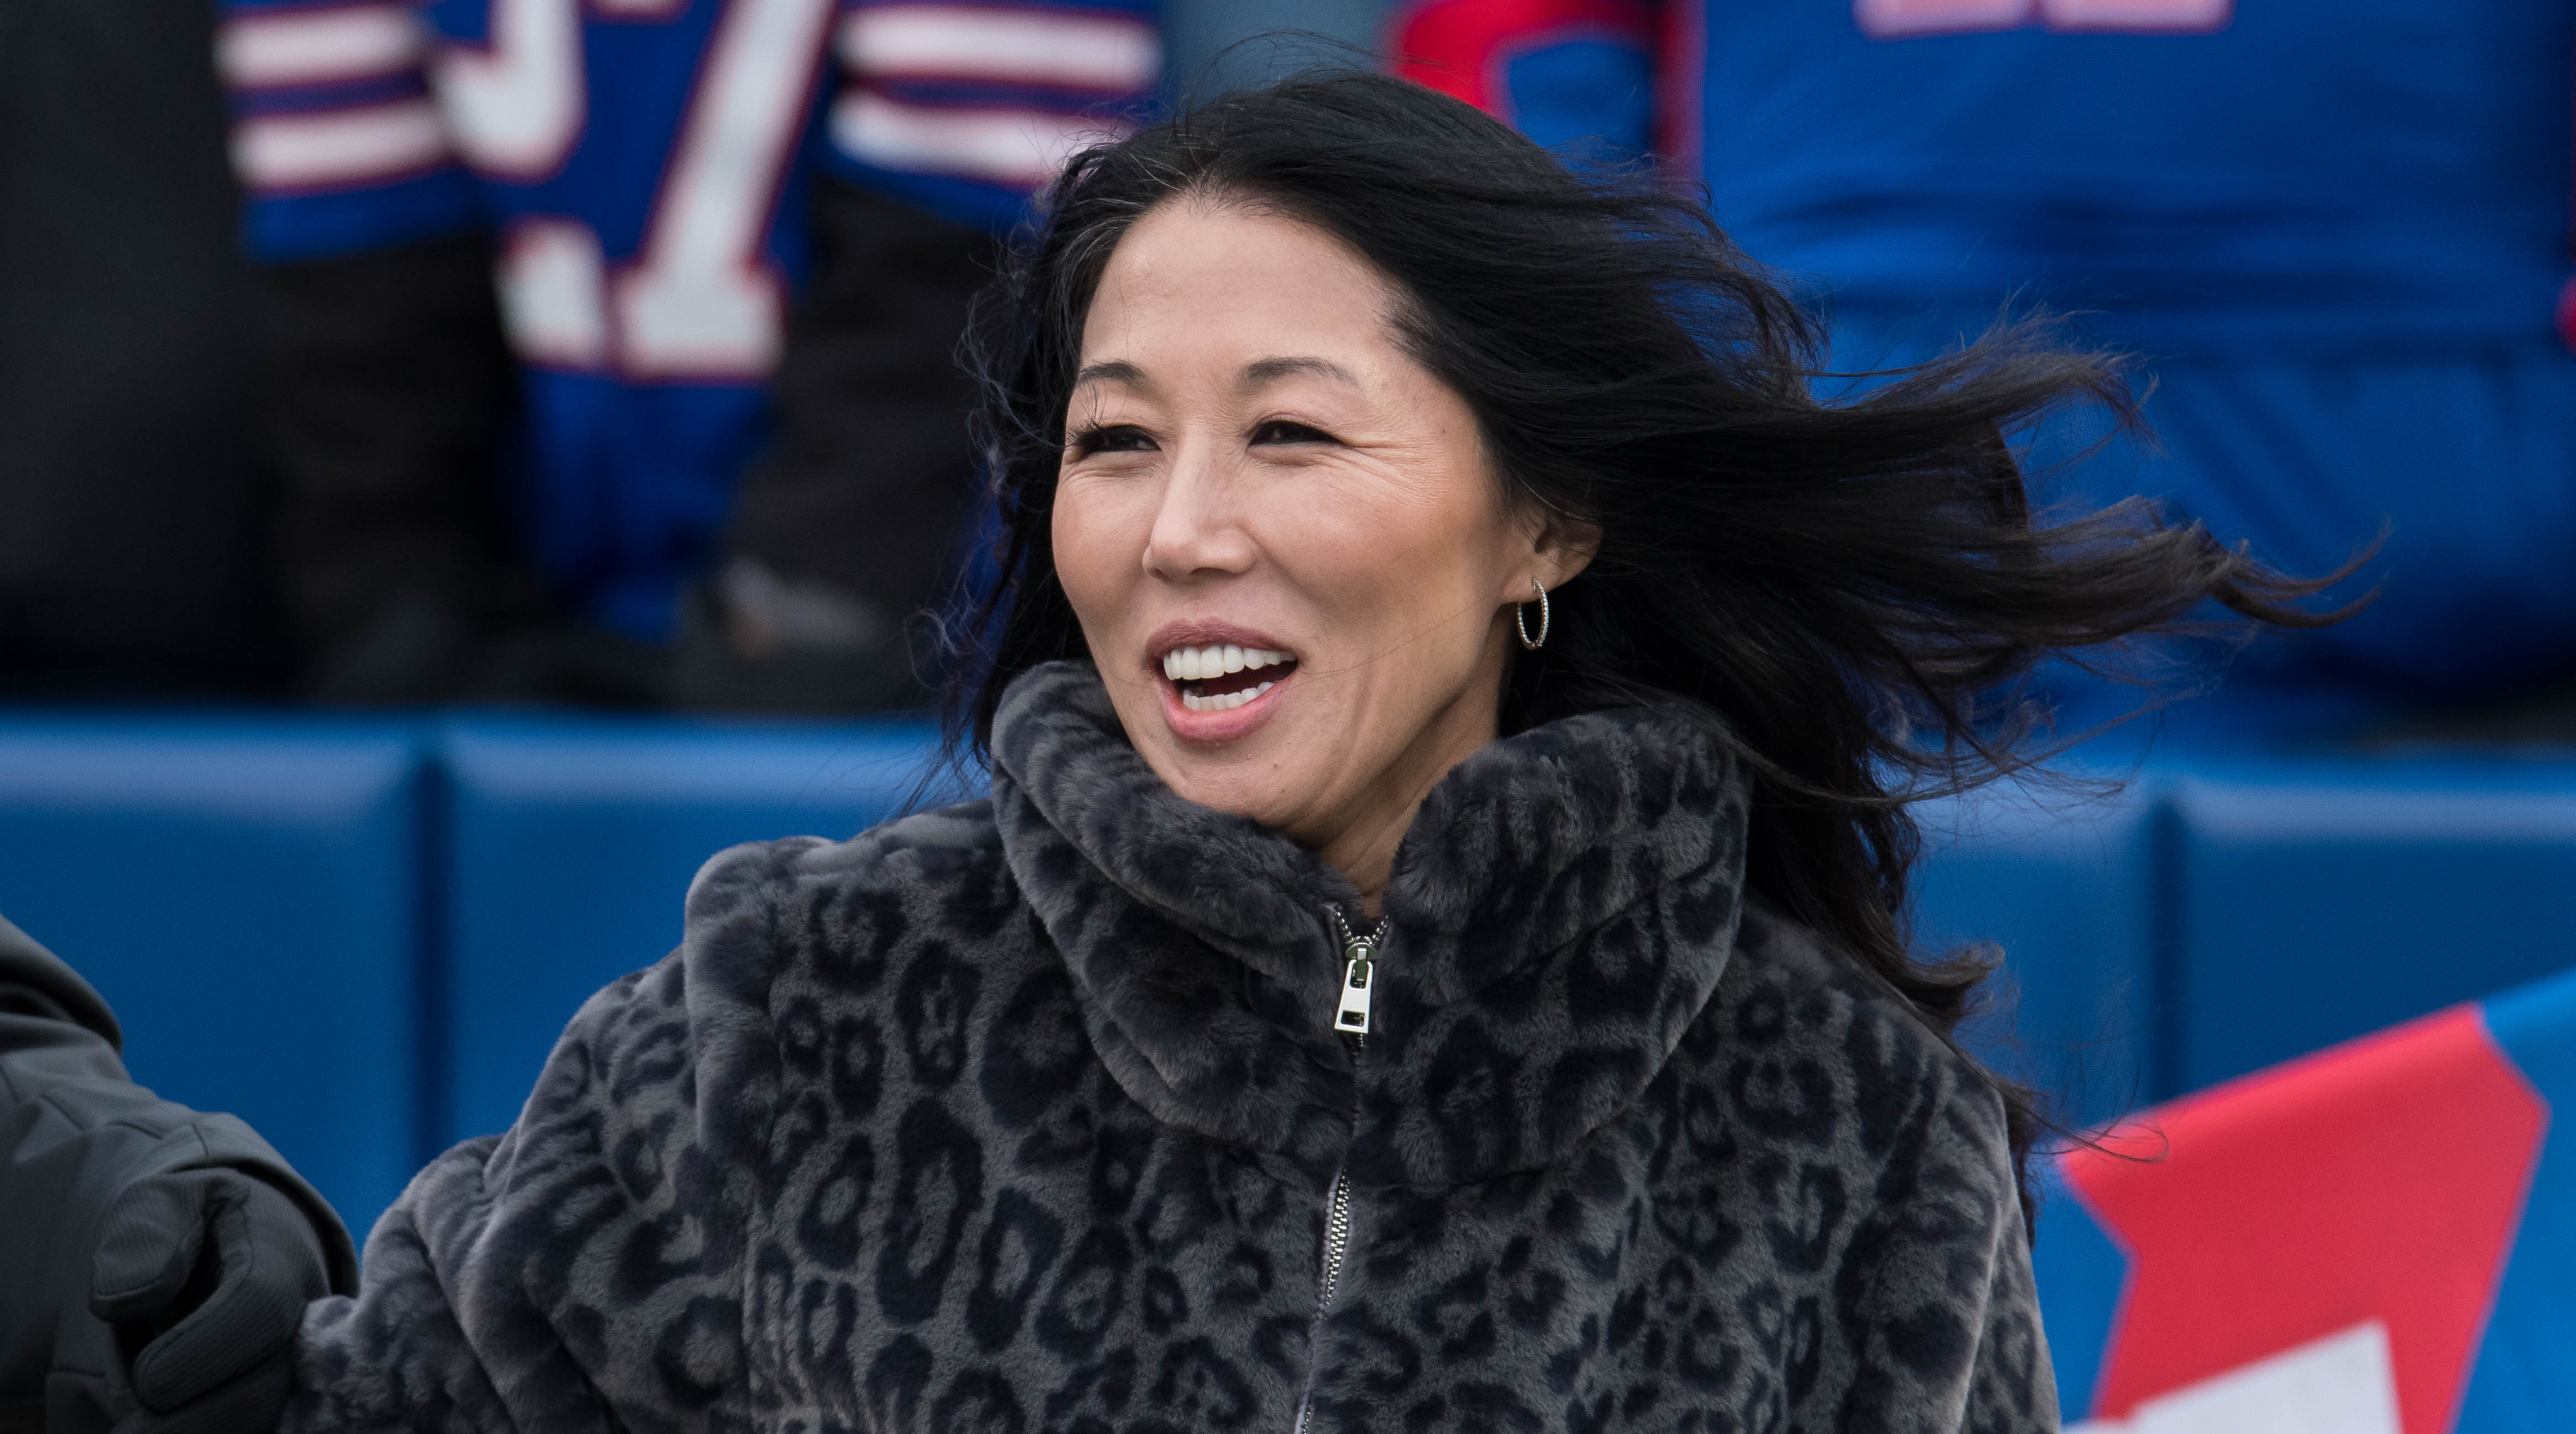 Bills Owner Kim Pegula Receiving Treatment for Unexpected Health Issues